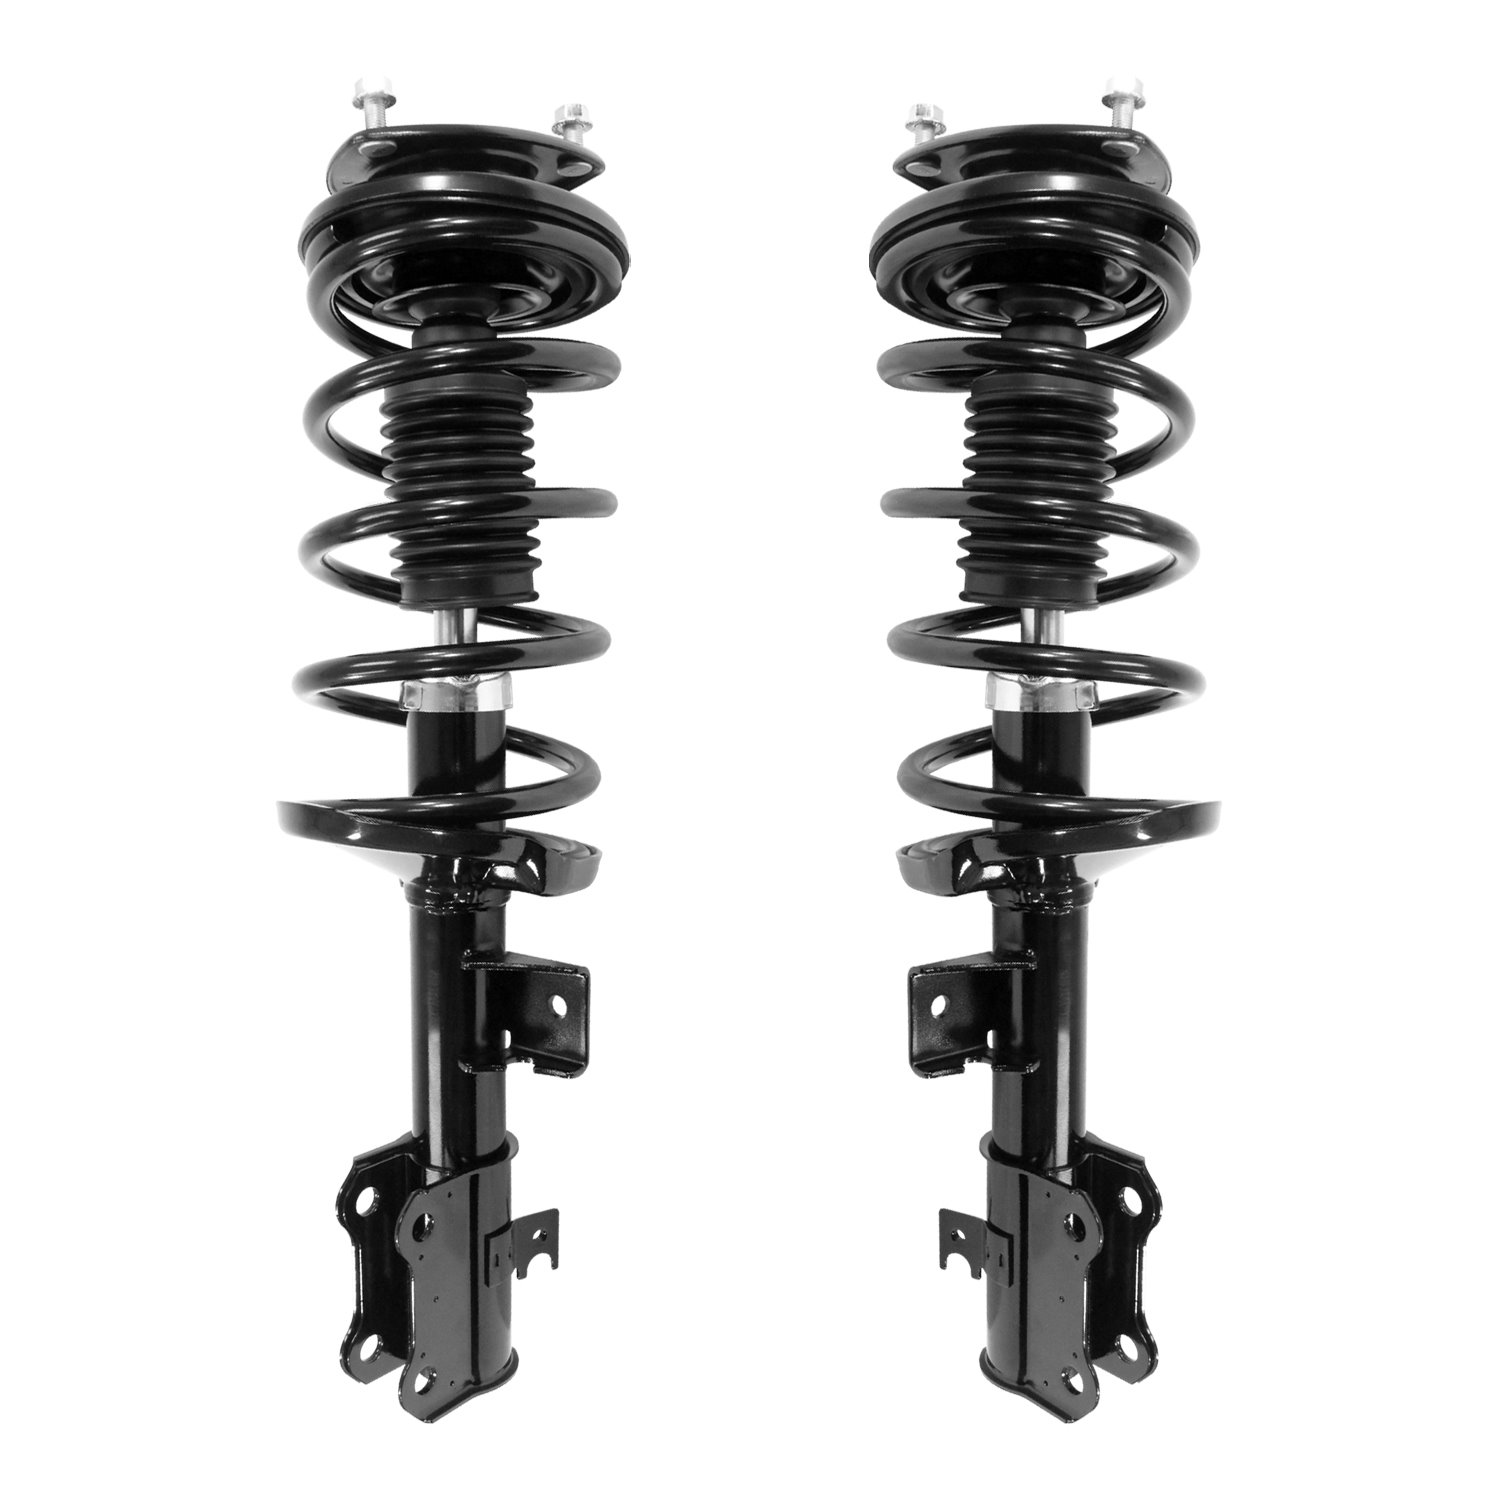 2-13213-13214-001 Suspension Strut & Coil Spring Assembly Set Fits Select Ford Transit Connect